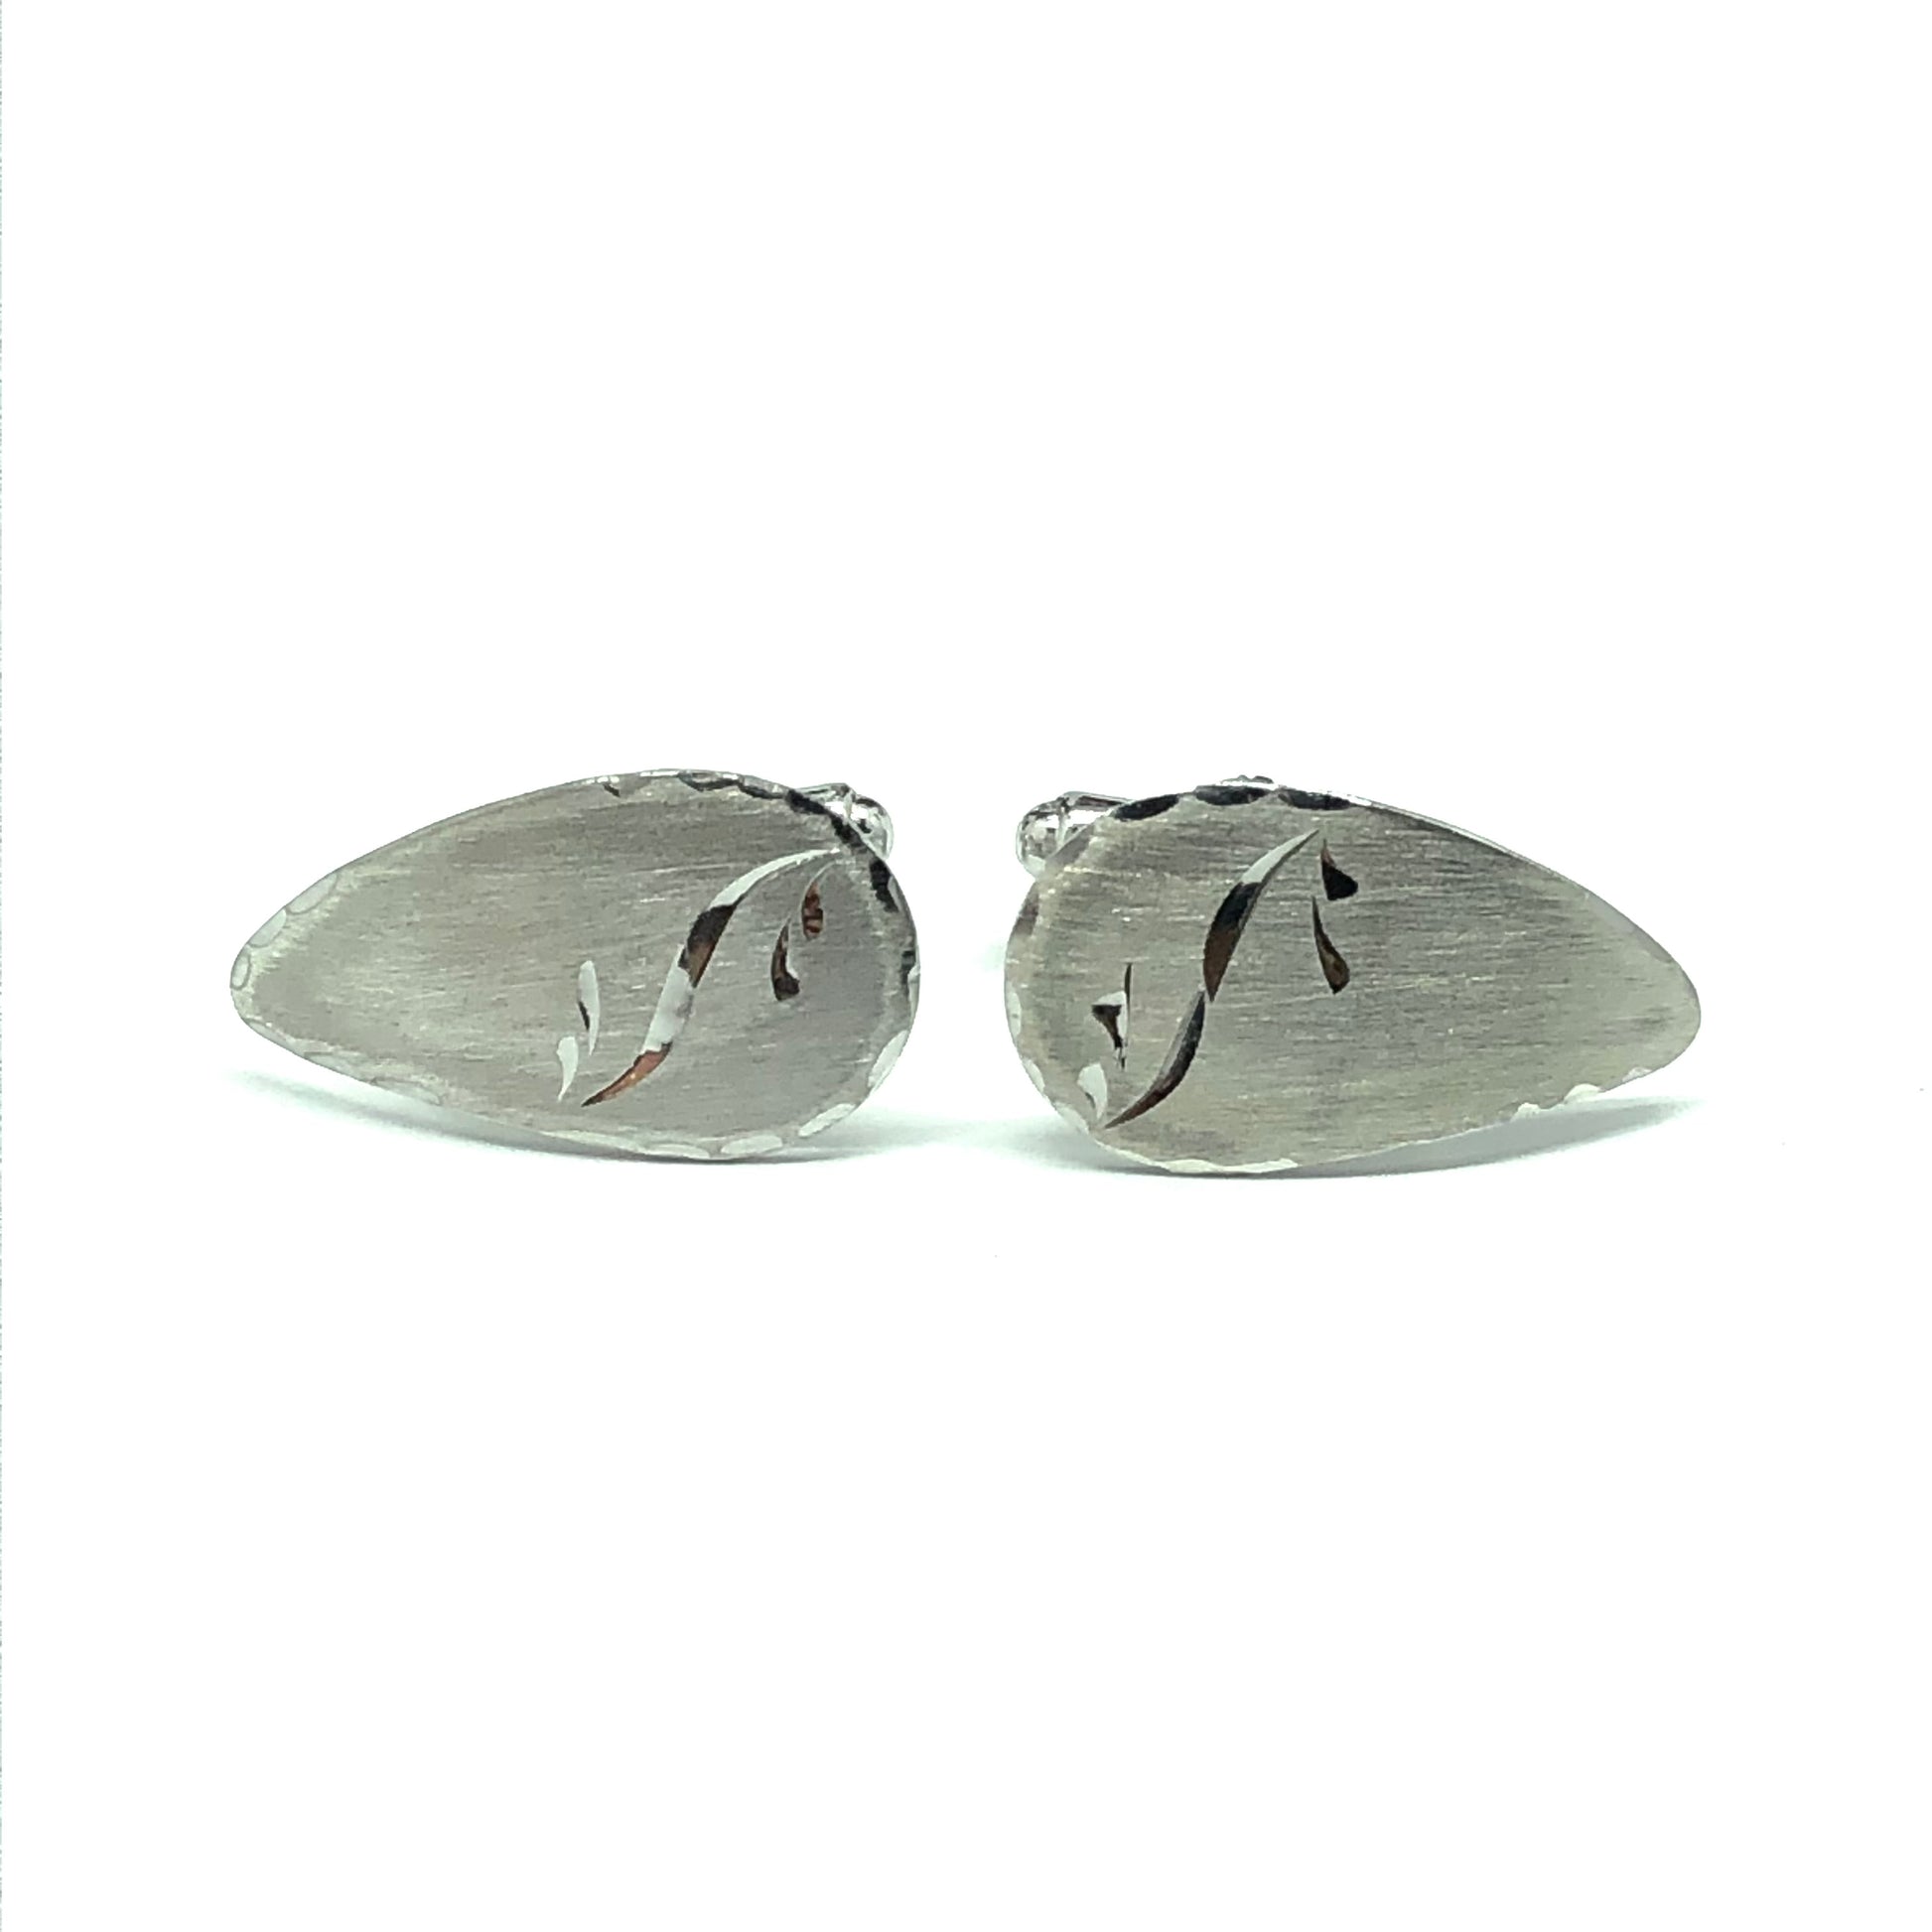 Jewelry - Mens Pre-owned Sterling Silver Bullet Back Cufflinks